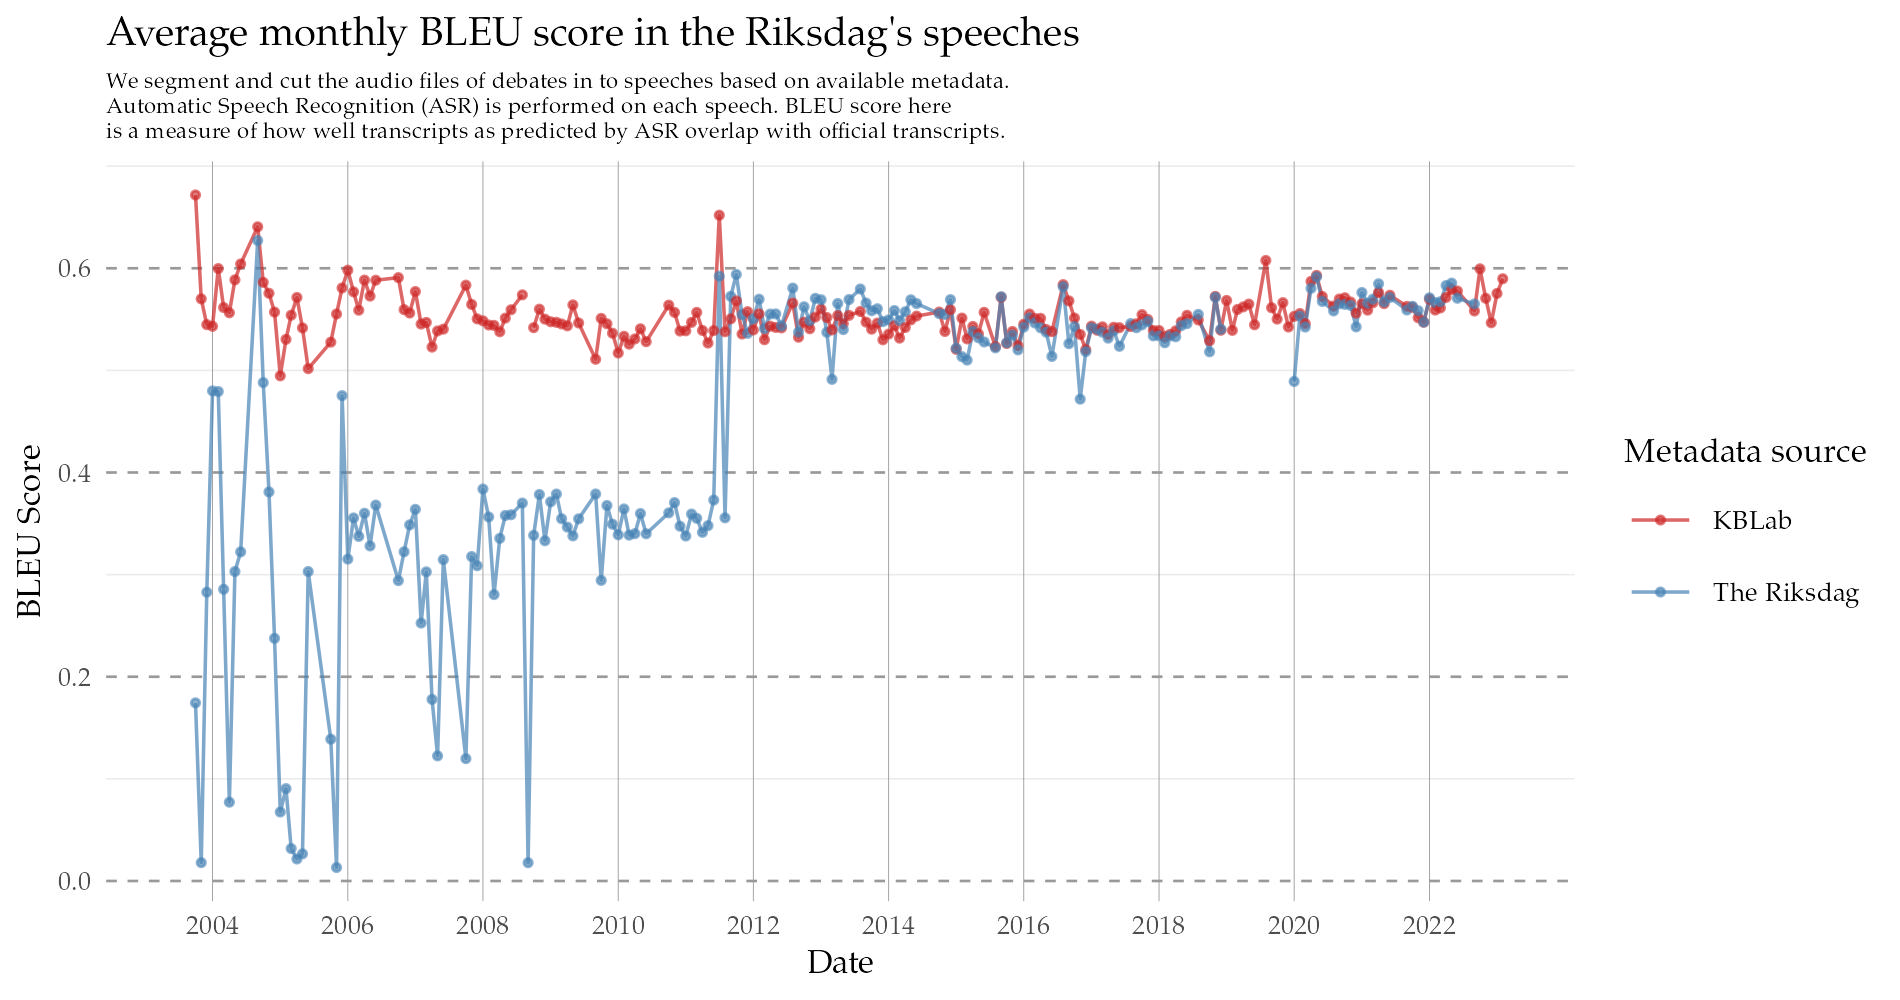 BLEU score is often used as a scoring metric for determining how well a translation overlaps with a reference, source or ground truth text. In our case we split the debate audio file in to speeches based on 'start' and 'end' metadata. We  then use the wav2vec2-voxrex-swedish speech-to-text model to automatically transcribe any speech within the split speeches. The automatic model transcription can be seen as a form of 'translation'. Finally, we compare the automated transcription against the official transcript. A high BLEU score indicates what was spoken within the segmented region overlaps to a high degree with the official transcript.